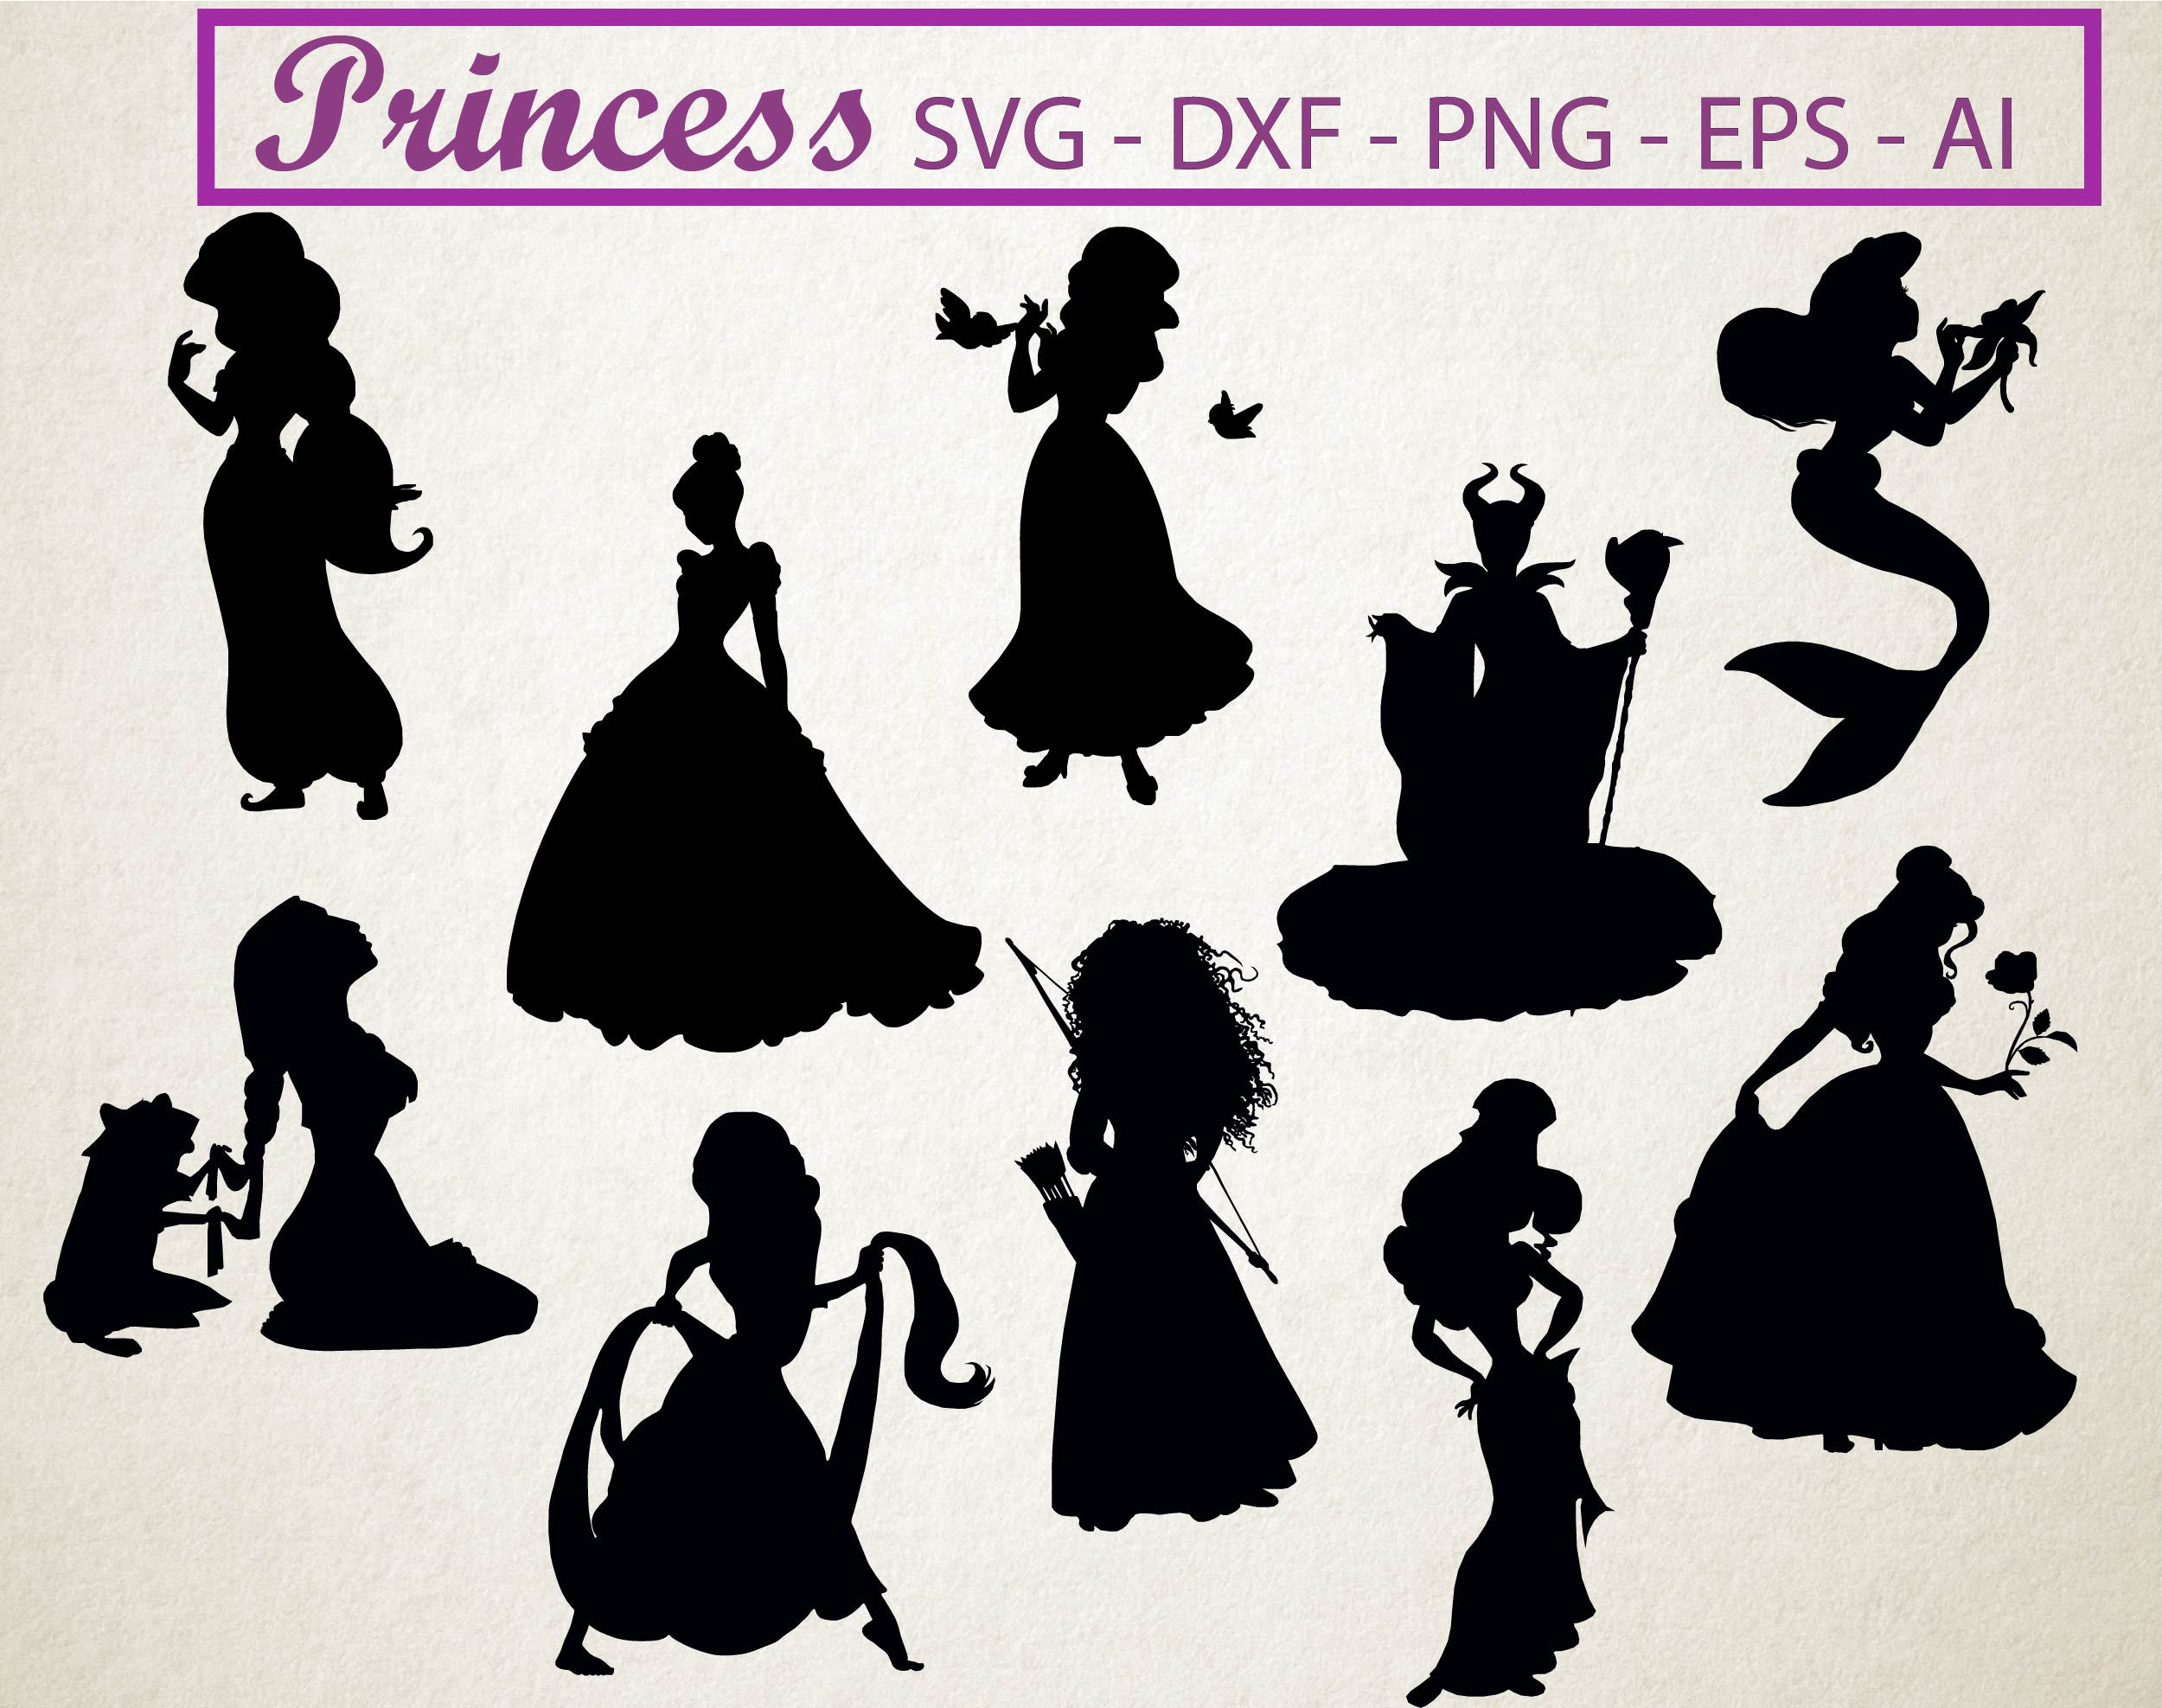 Download 70 % OFF Disney princess svg silhouette clipart pack | Etsy